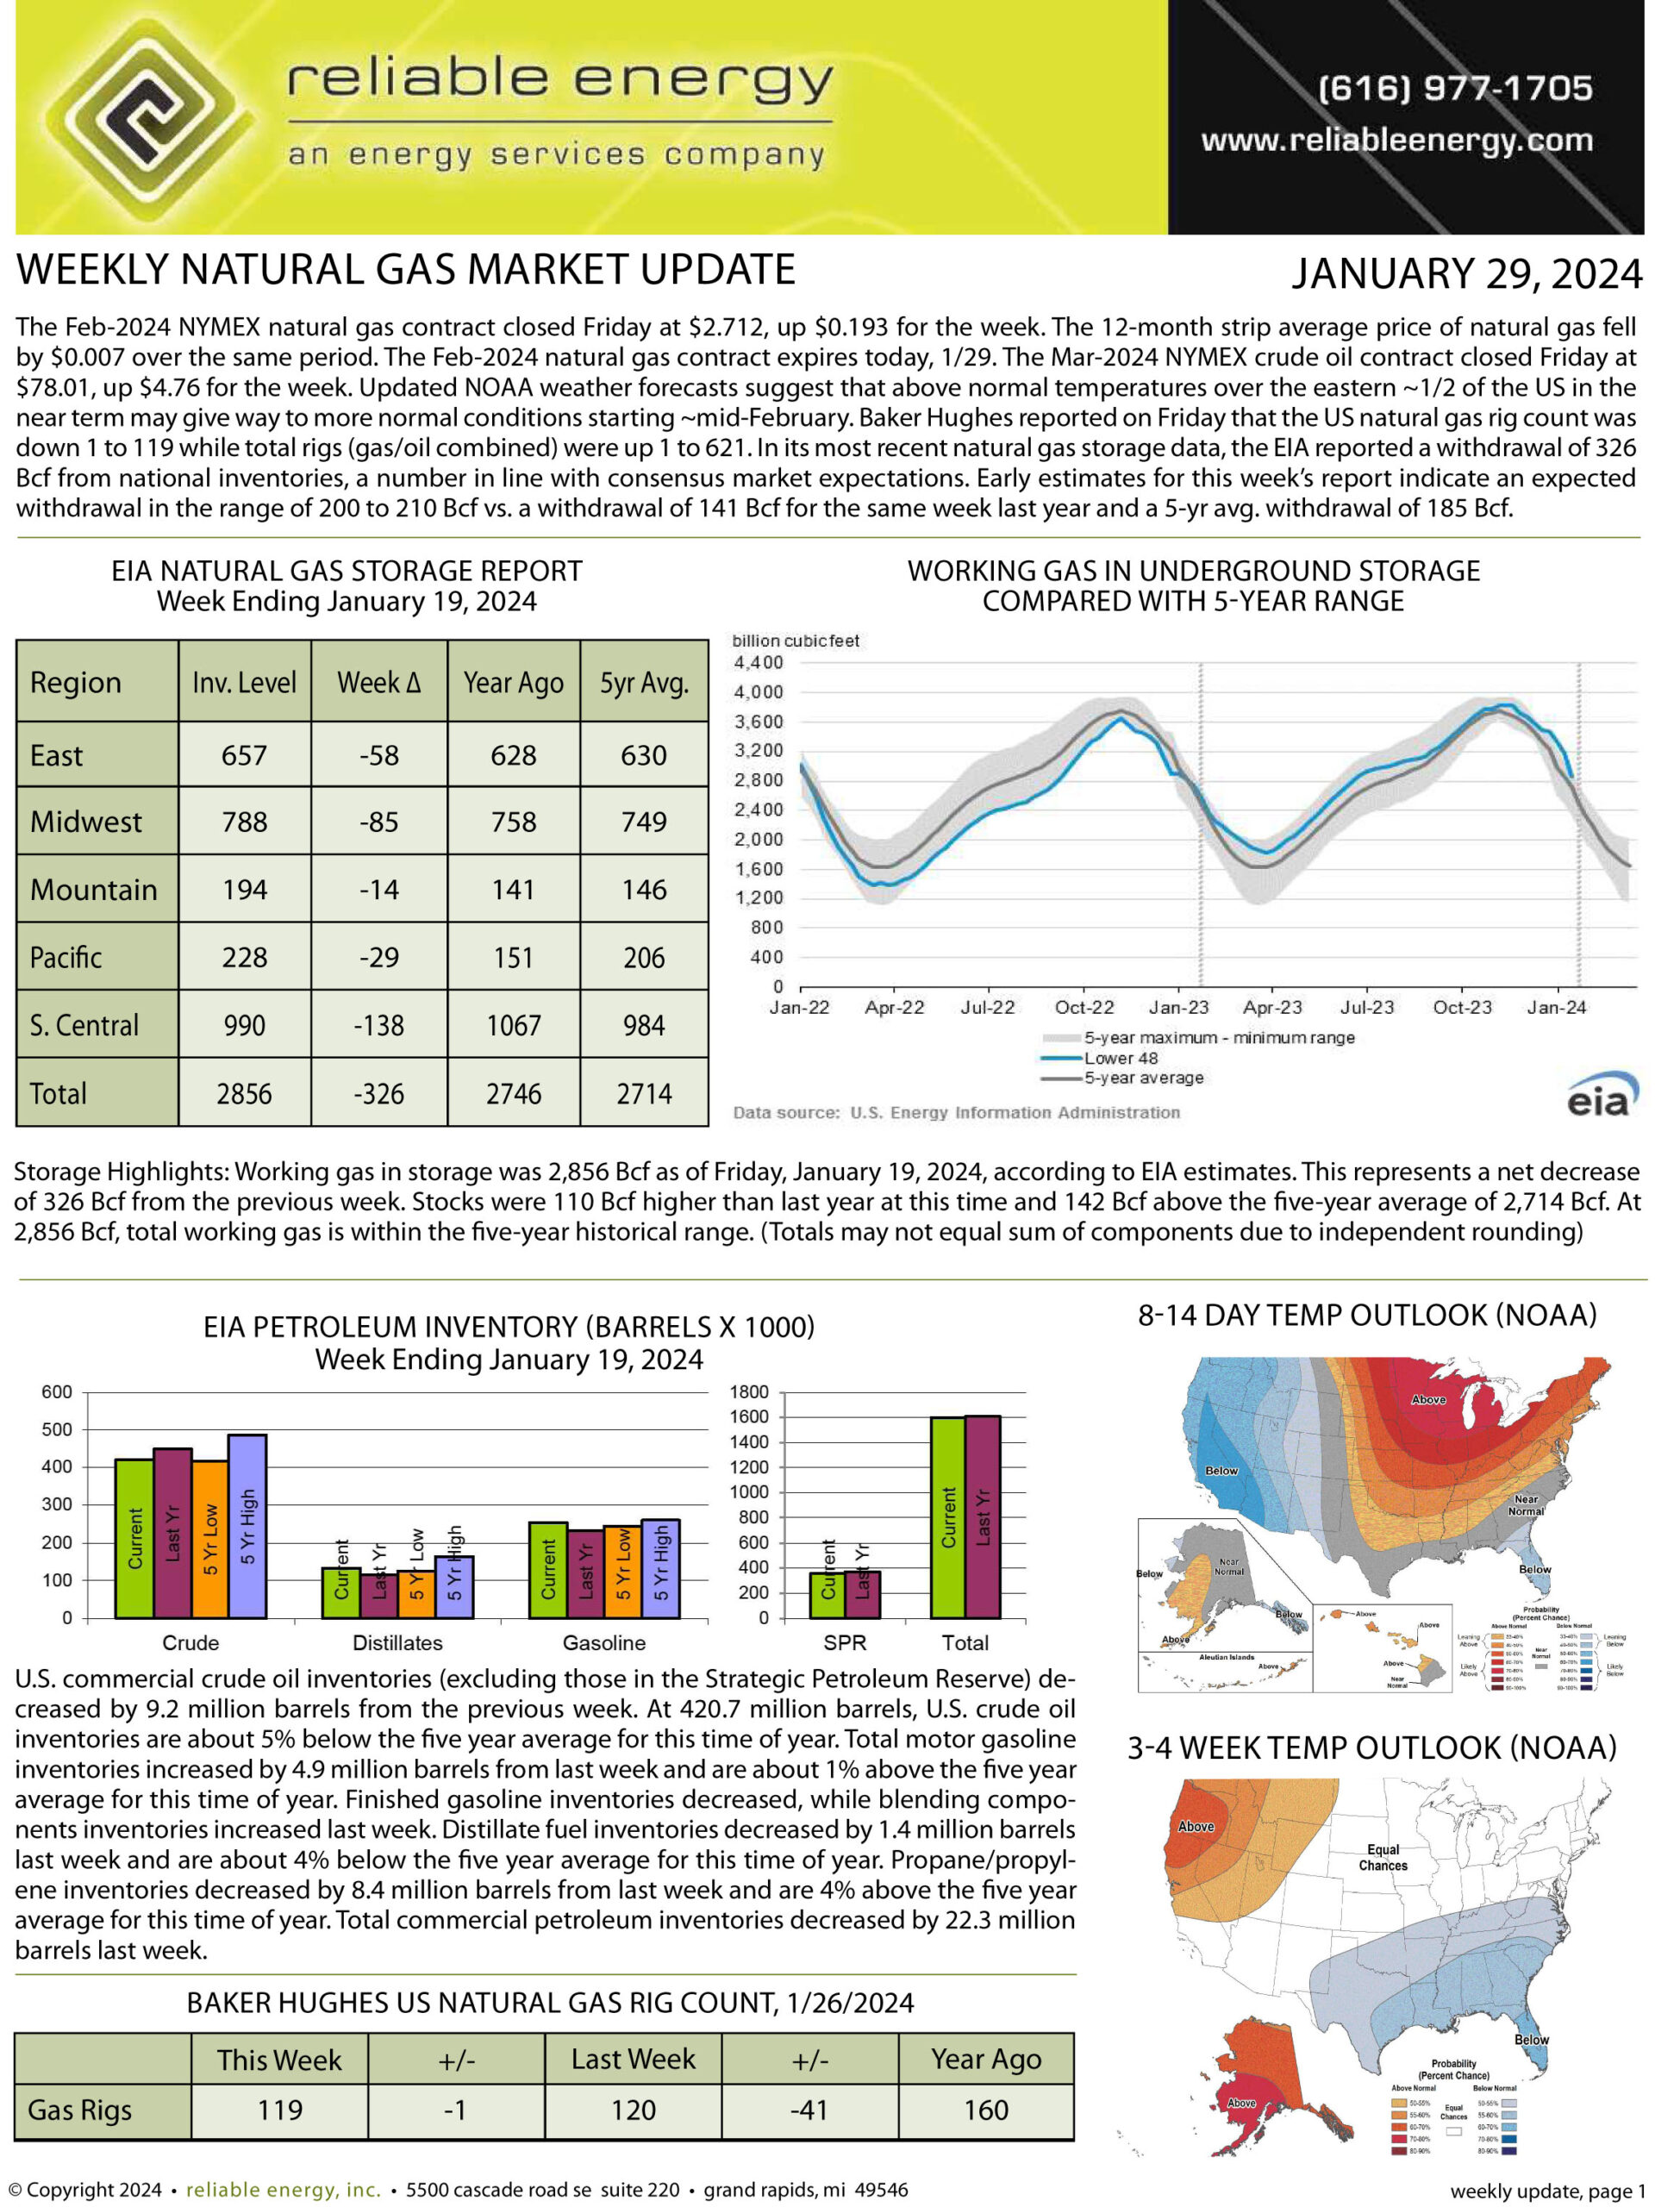 Natural Gas Market Update – January 29, 2024